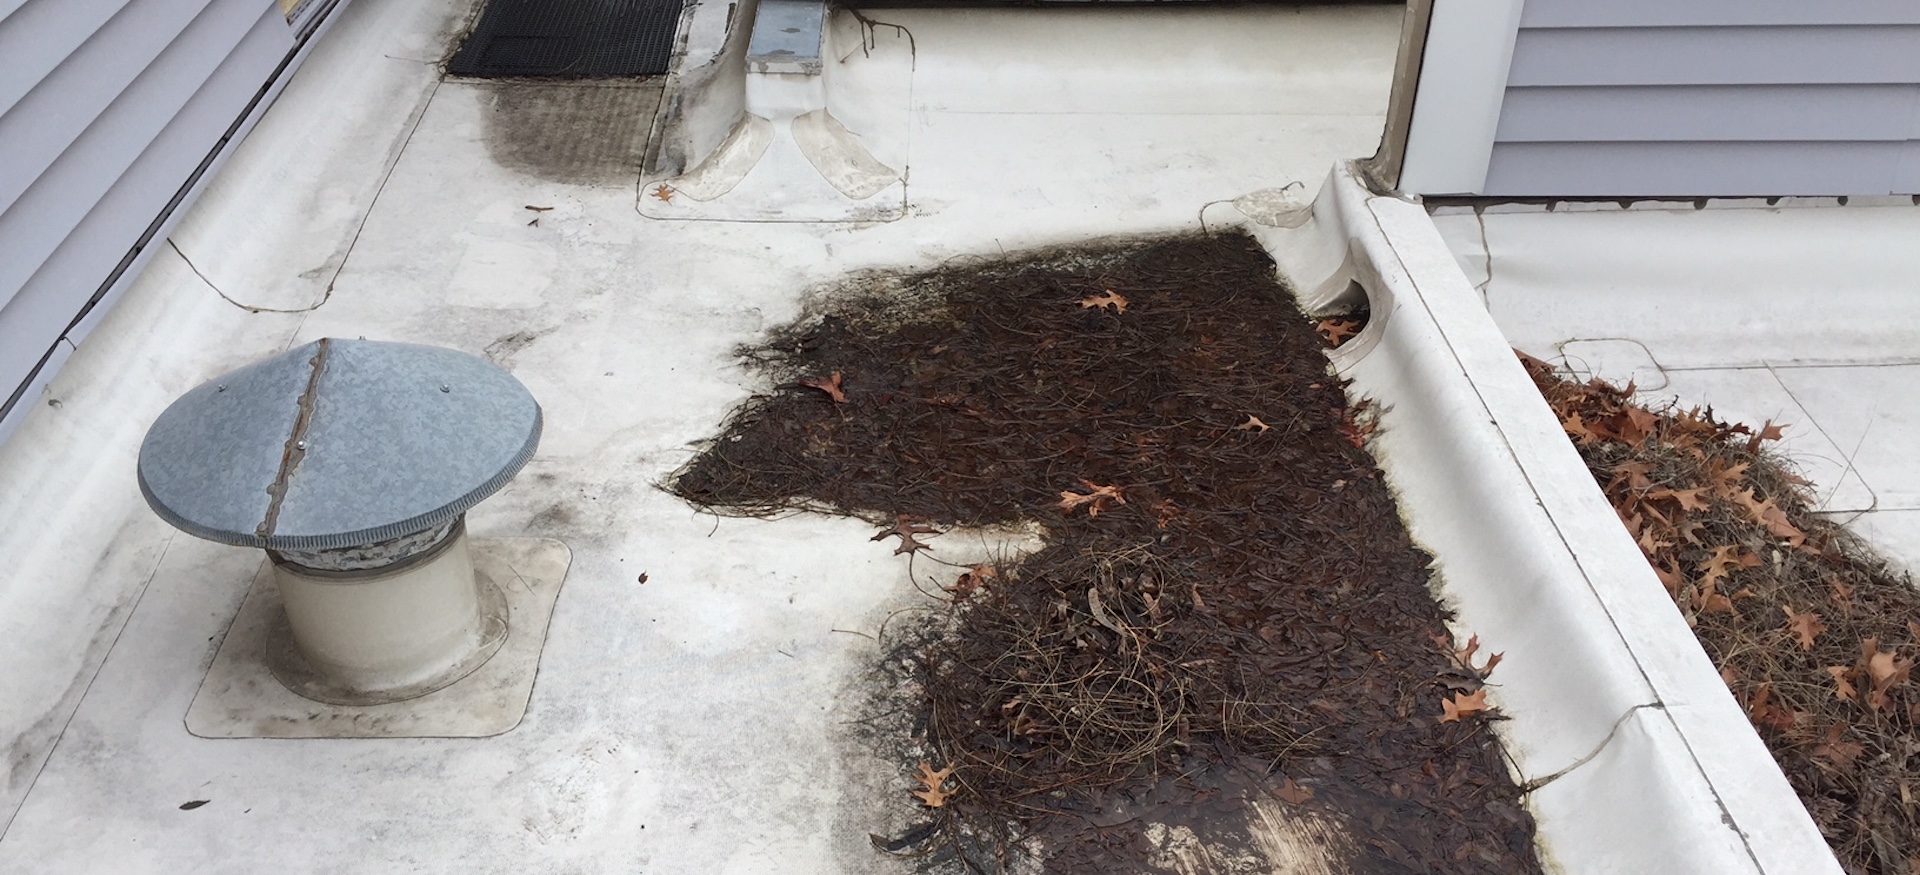 Commercial Flat Roof With Clogged Roof Drain, Leaves, And Muck